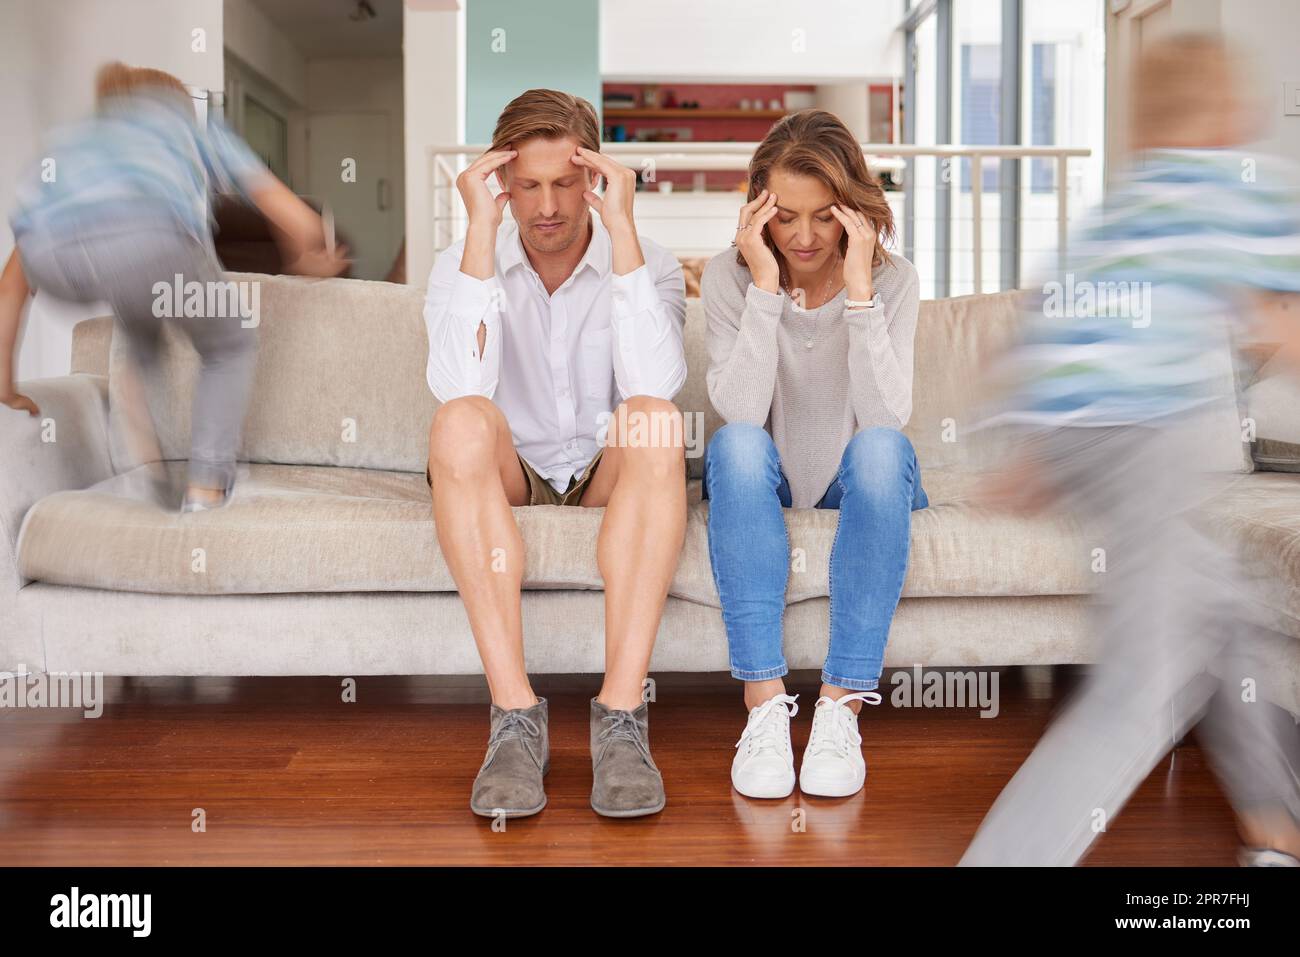 Naughty hyperactive, energetic children annoying their mother and father at home. Tired and stressed parents suffering from a headache and fatigue while adhd kids run around living room being noisy. Stock Photo